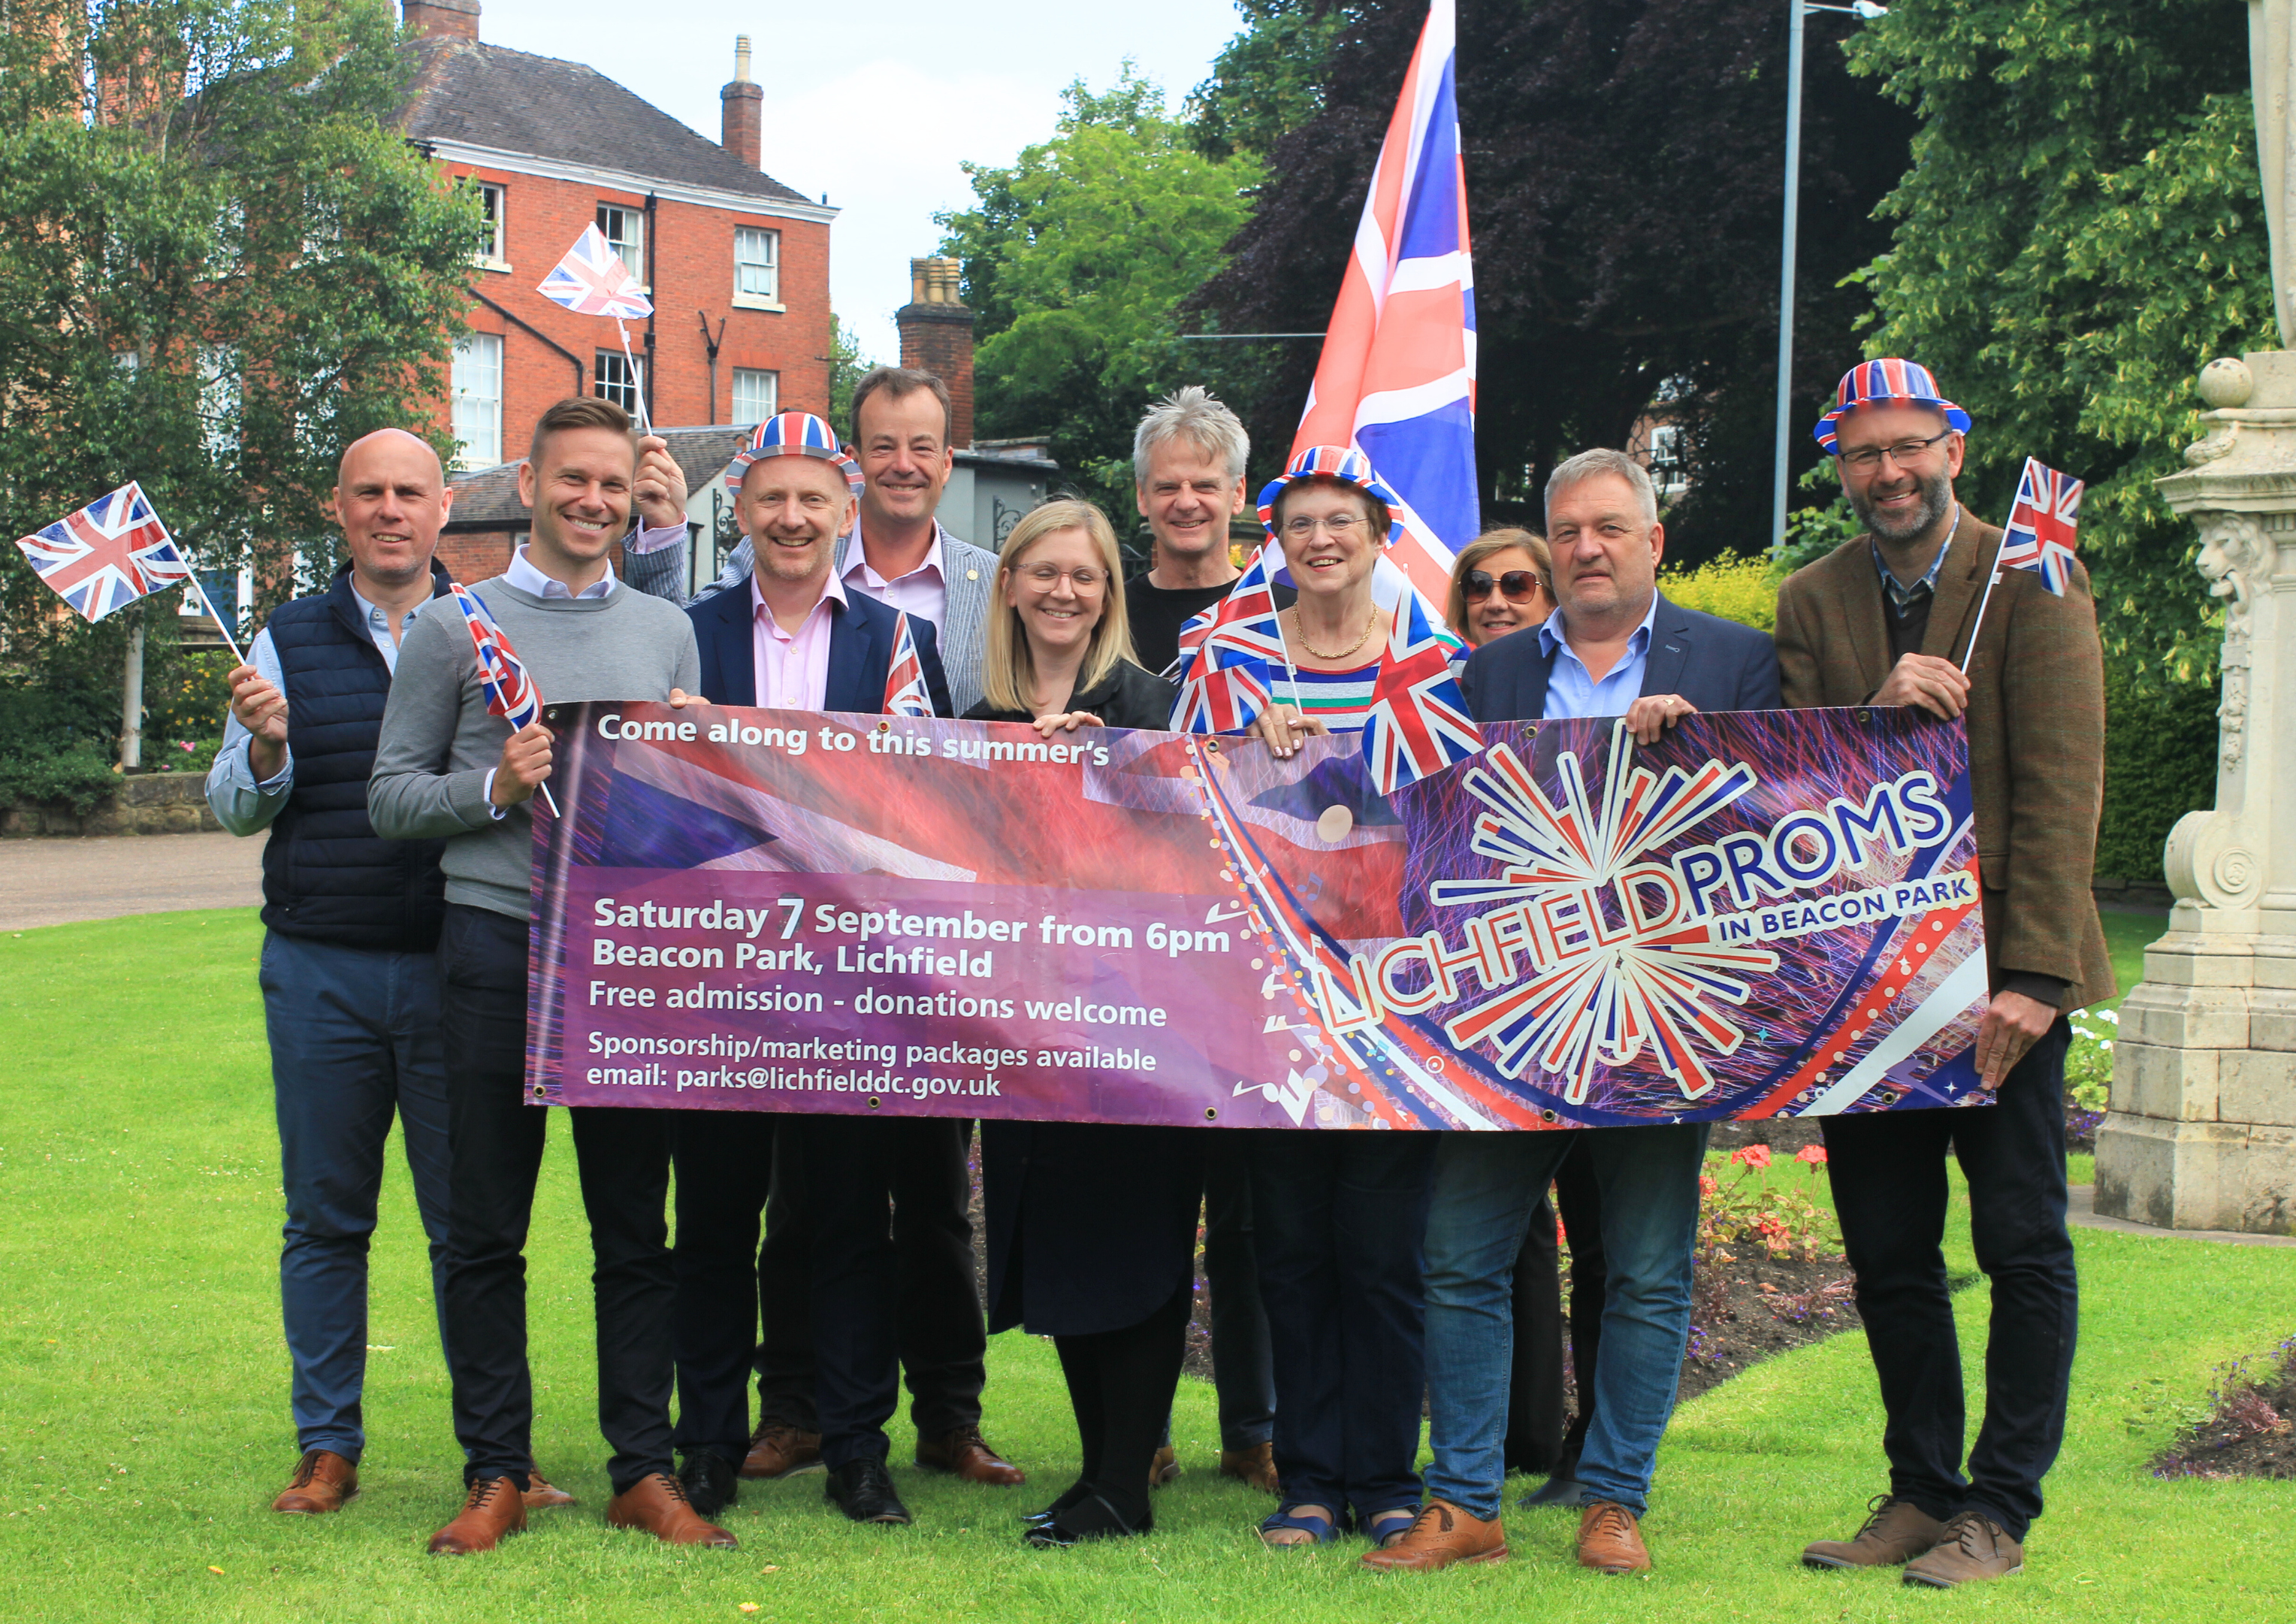 A photo of proud sponsors of this year’s Lichfield Proms in Beacon Park.